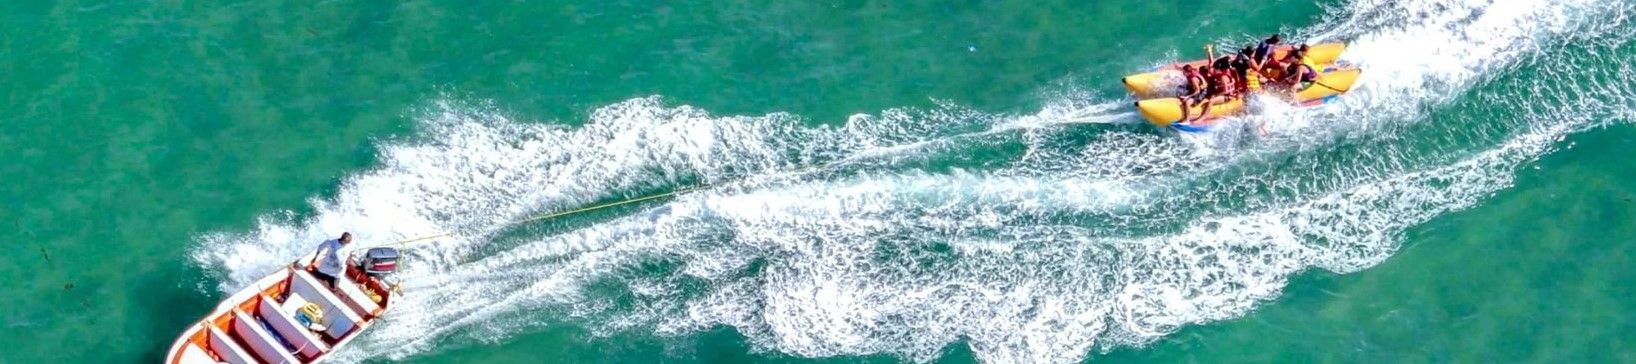 Banana boat zooming through blue waters, dragged by powerful jet ski, bird's-eye view